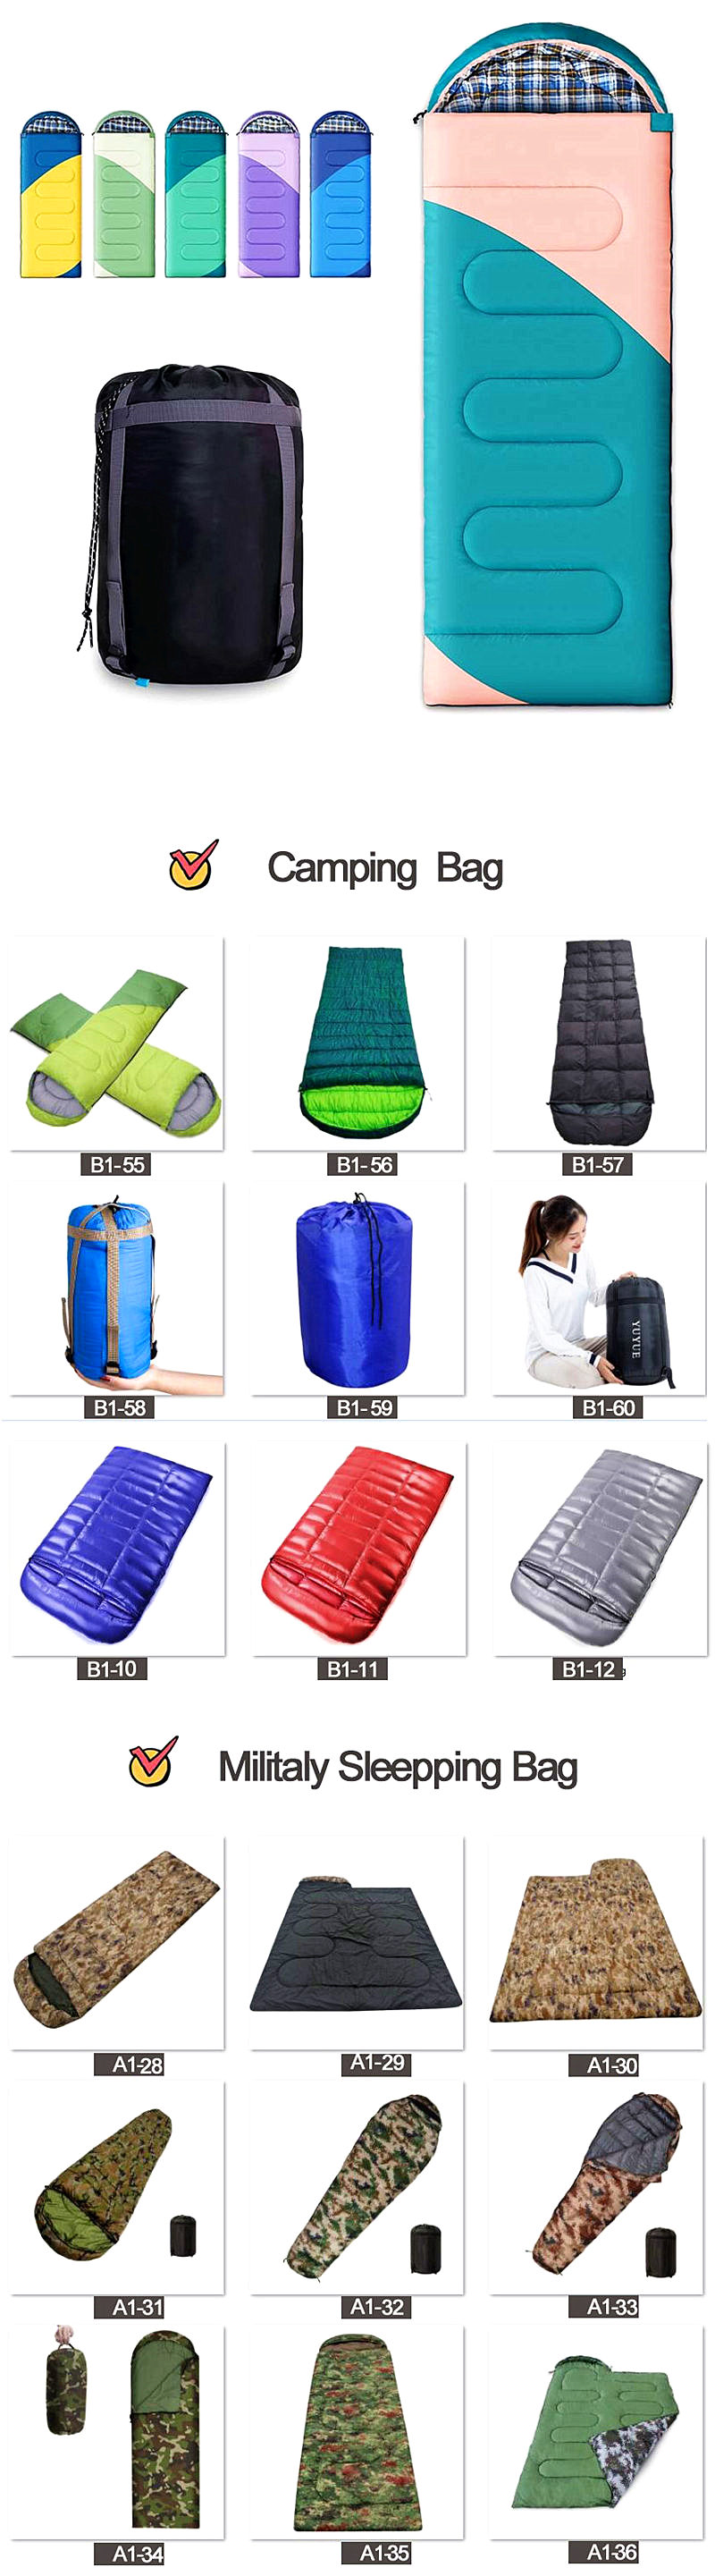 Hiking Sleeping Bags For Backpacking